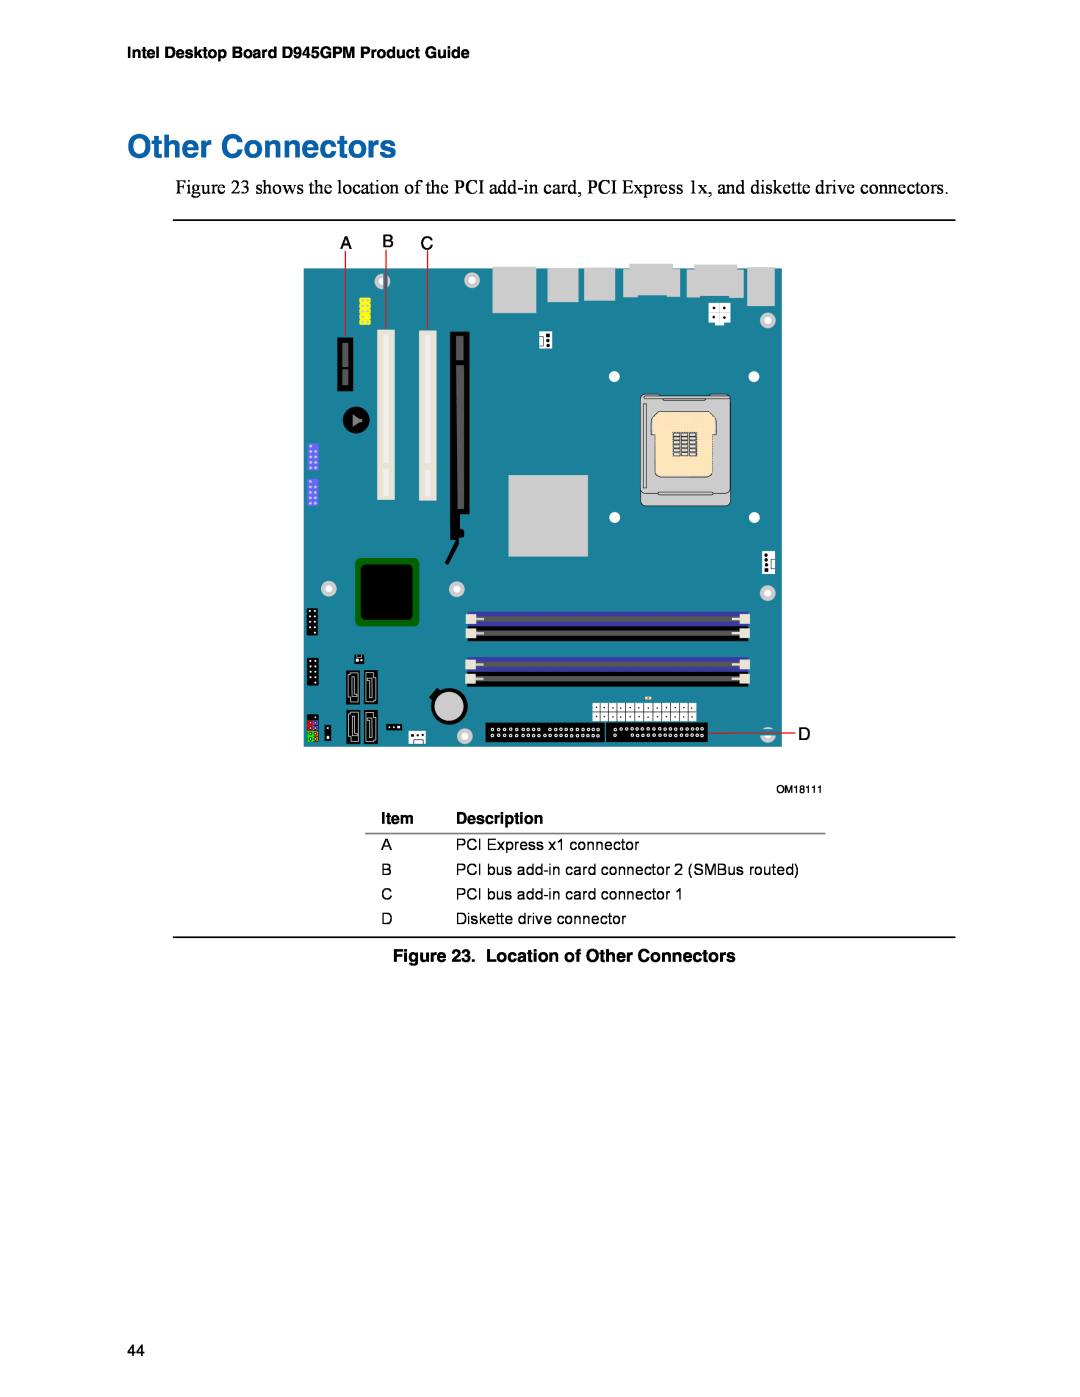 Intel manual A B C D, Location of Other Connectors, Intel Desktop Board D945GPM Product Guide 